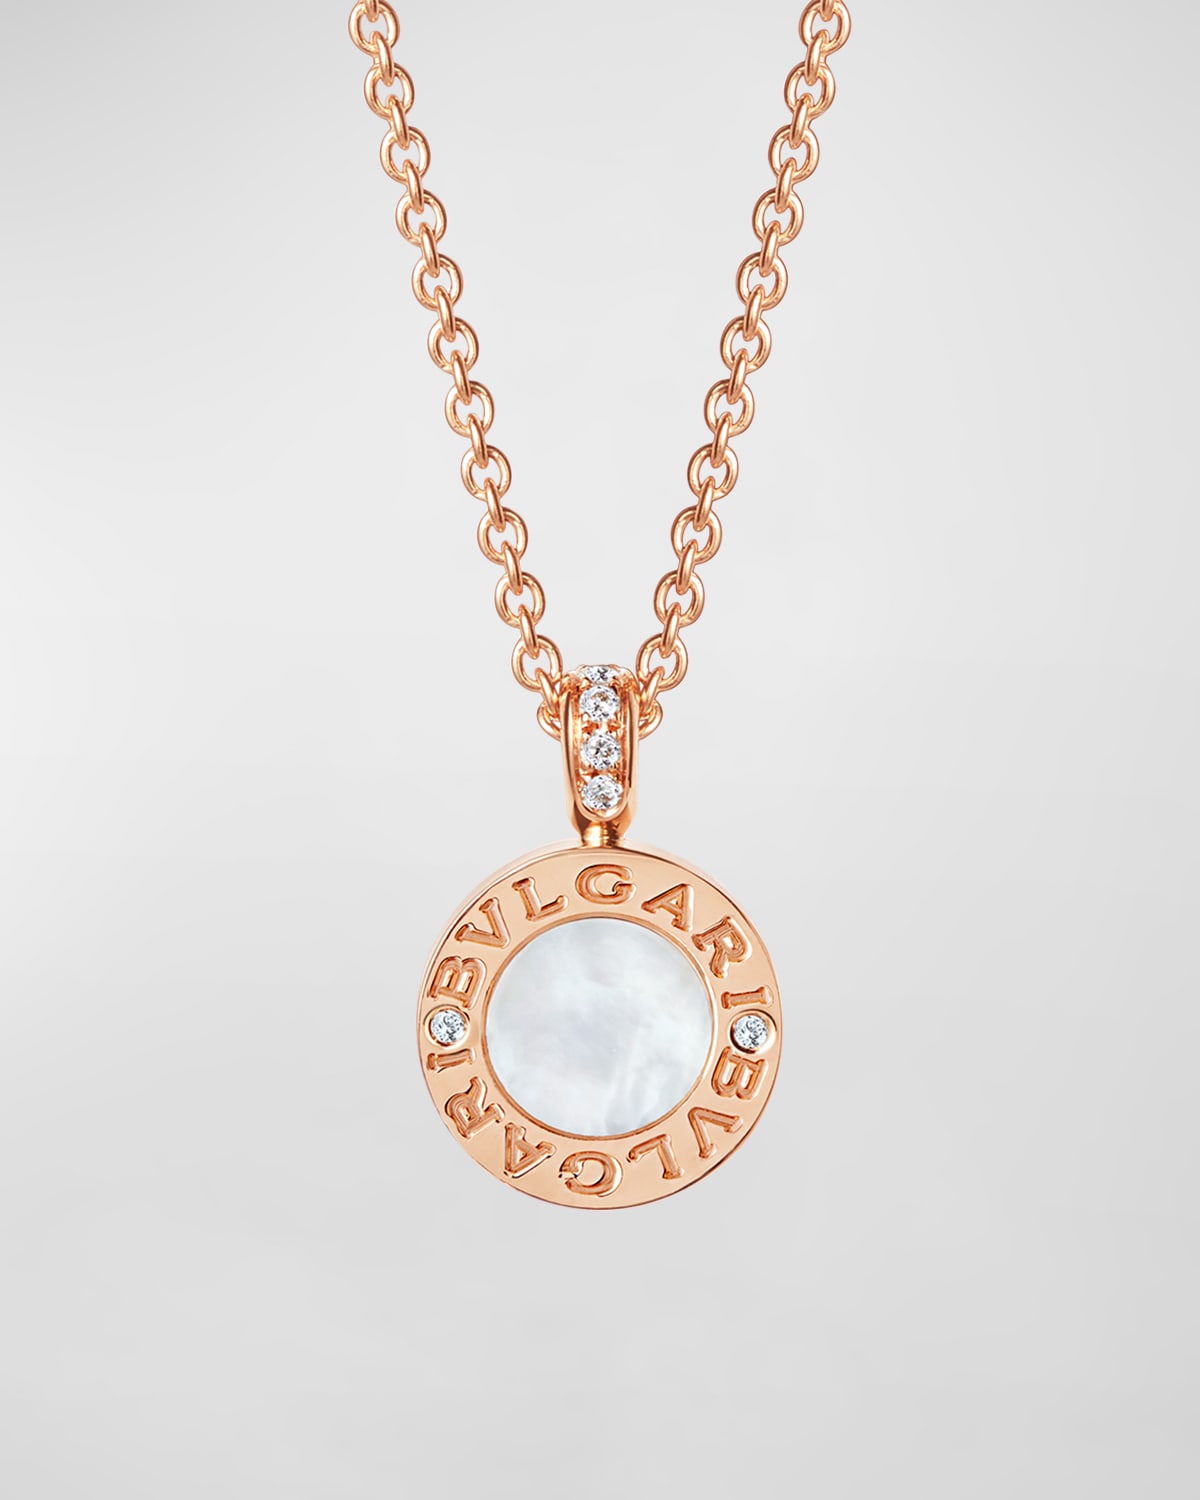 BVLGARI BVLGARI Pink Gold Mother-of-Pearl and Onyx Necklace